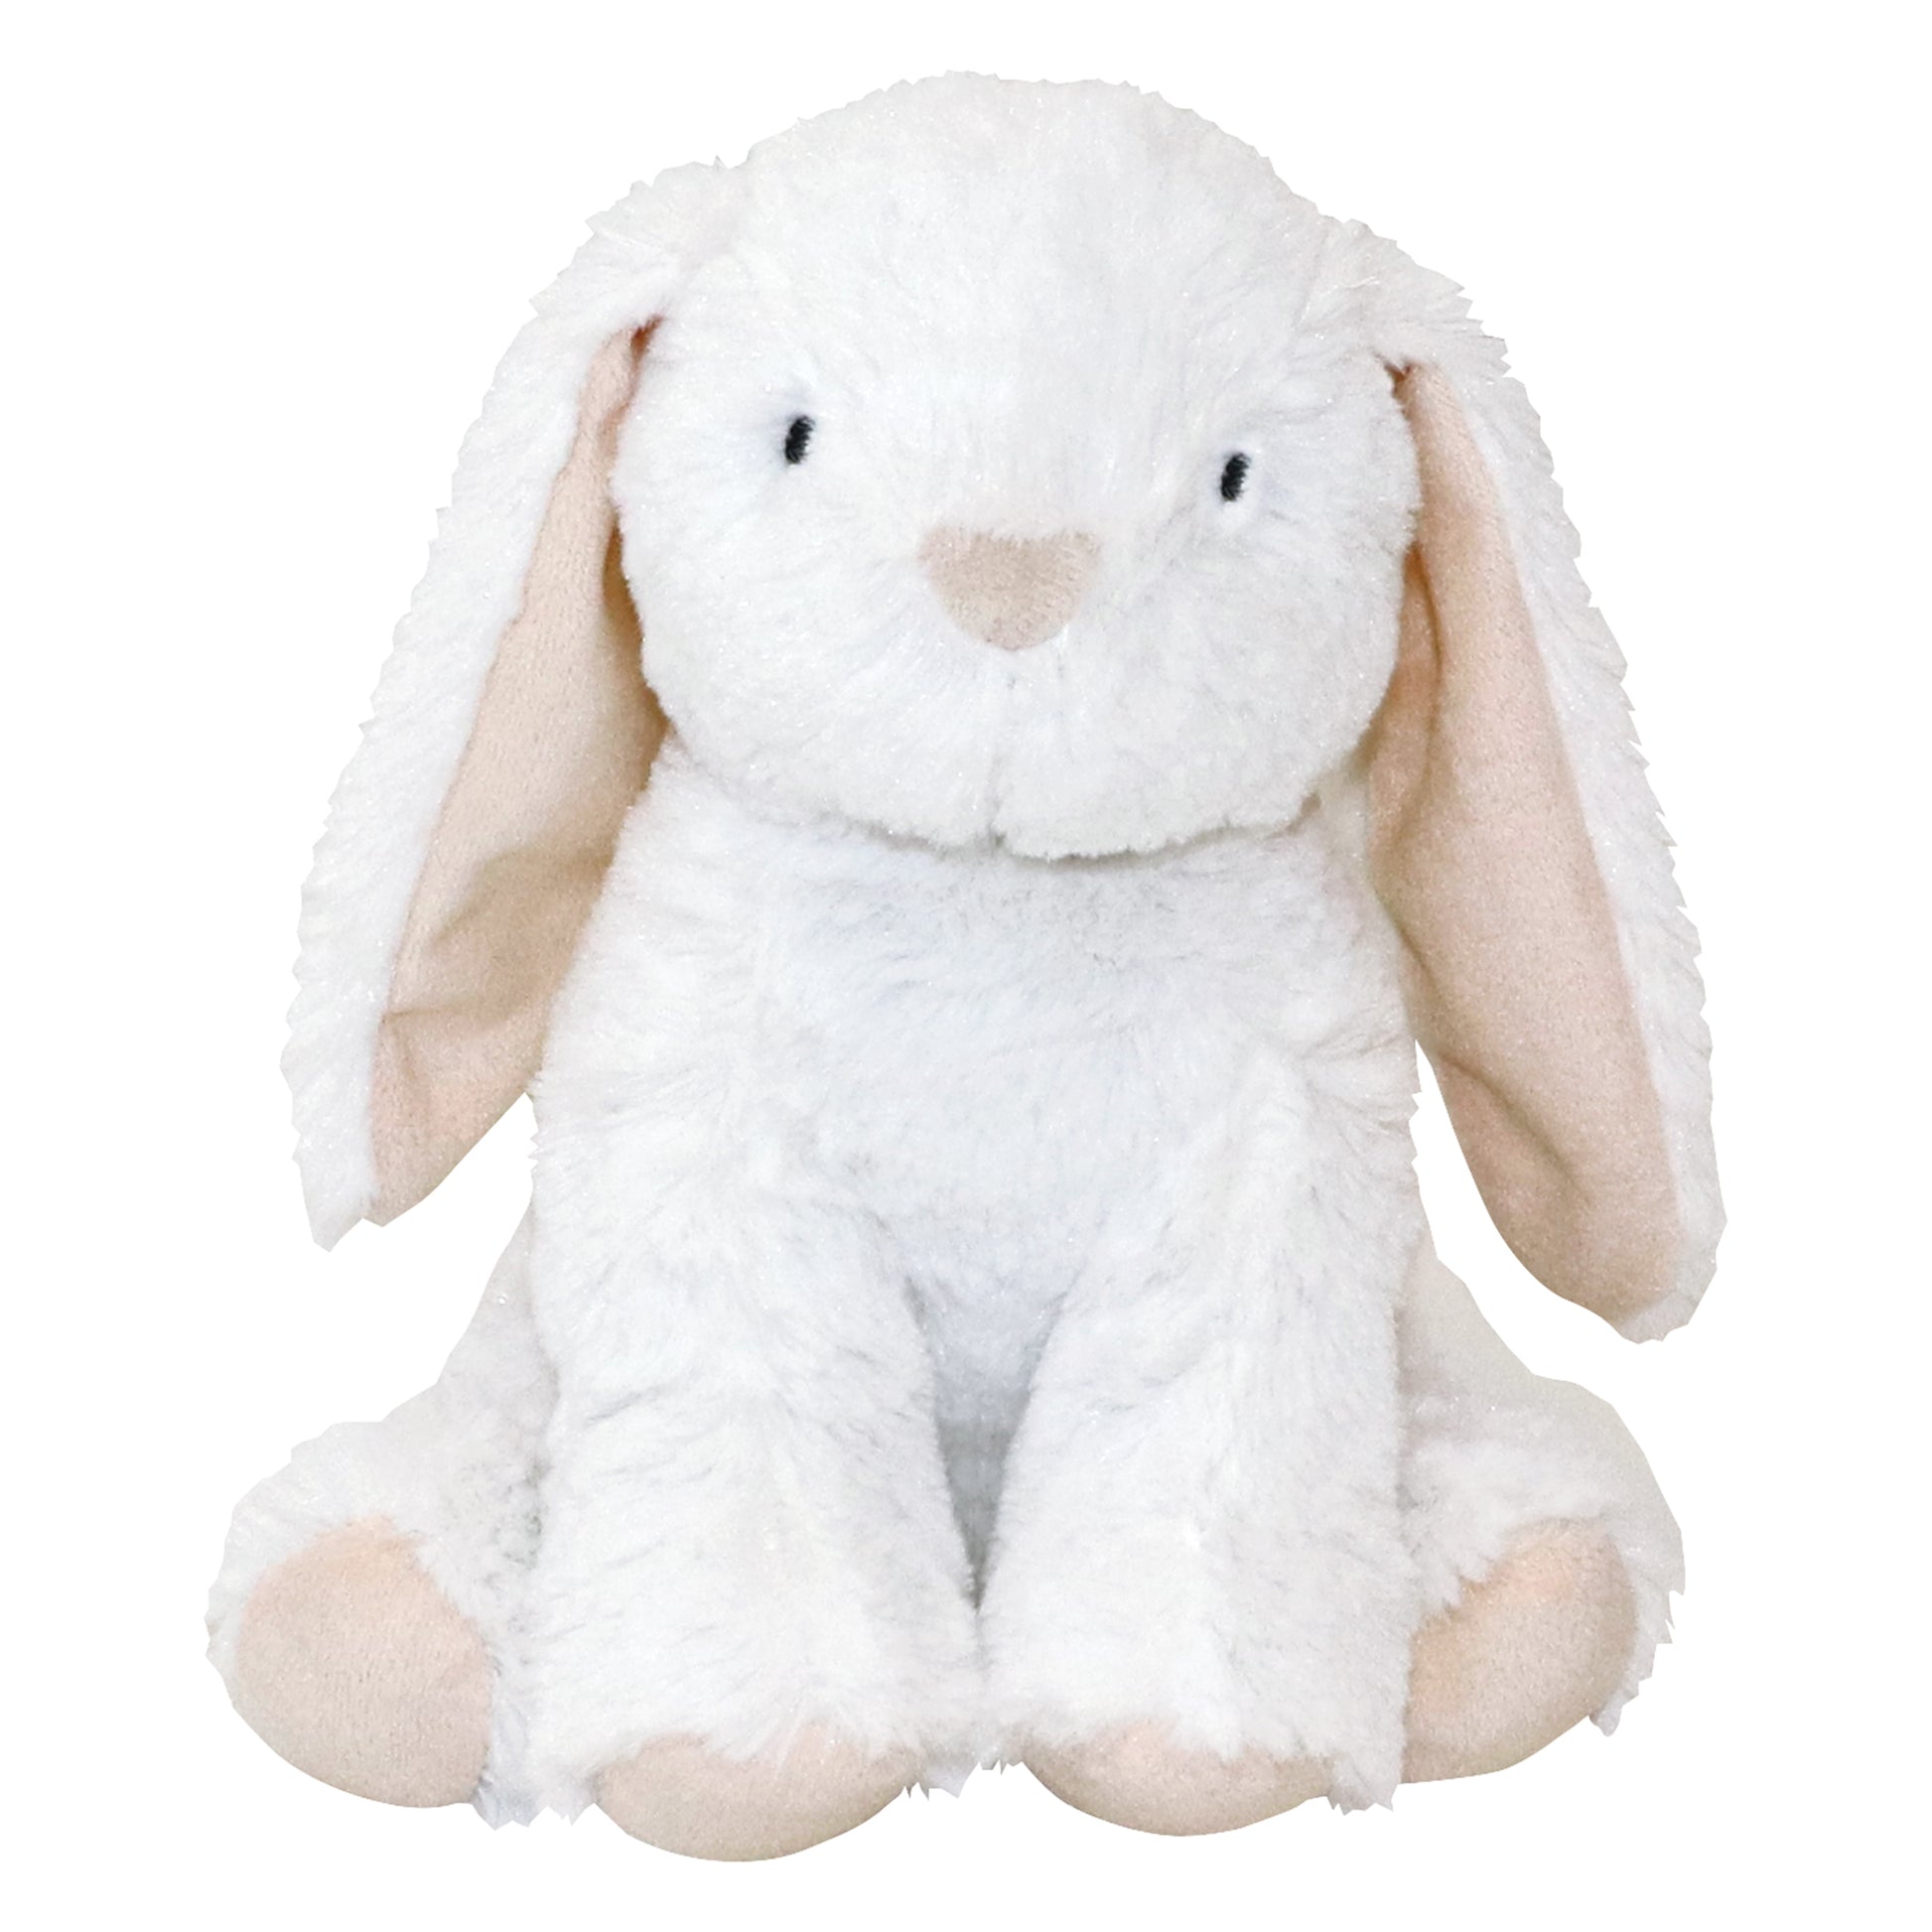 Pink and White Bunny Plush Toy- Main Image Bunny Toy is made of soft plush fabric in white with pink floppy ears. Measures 9 inches tall.